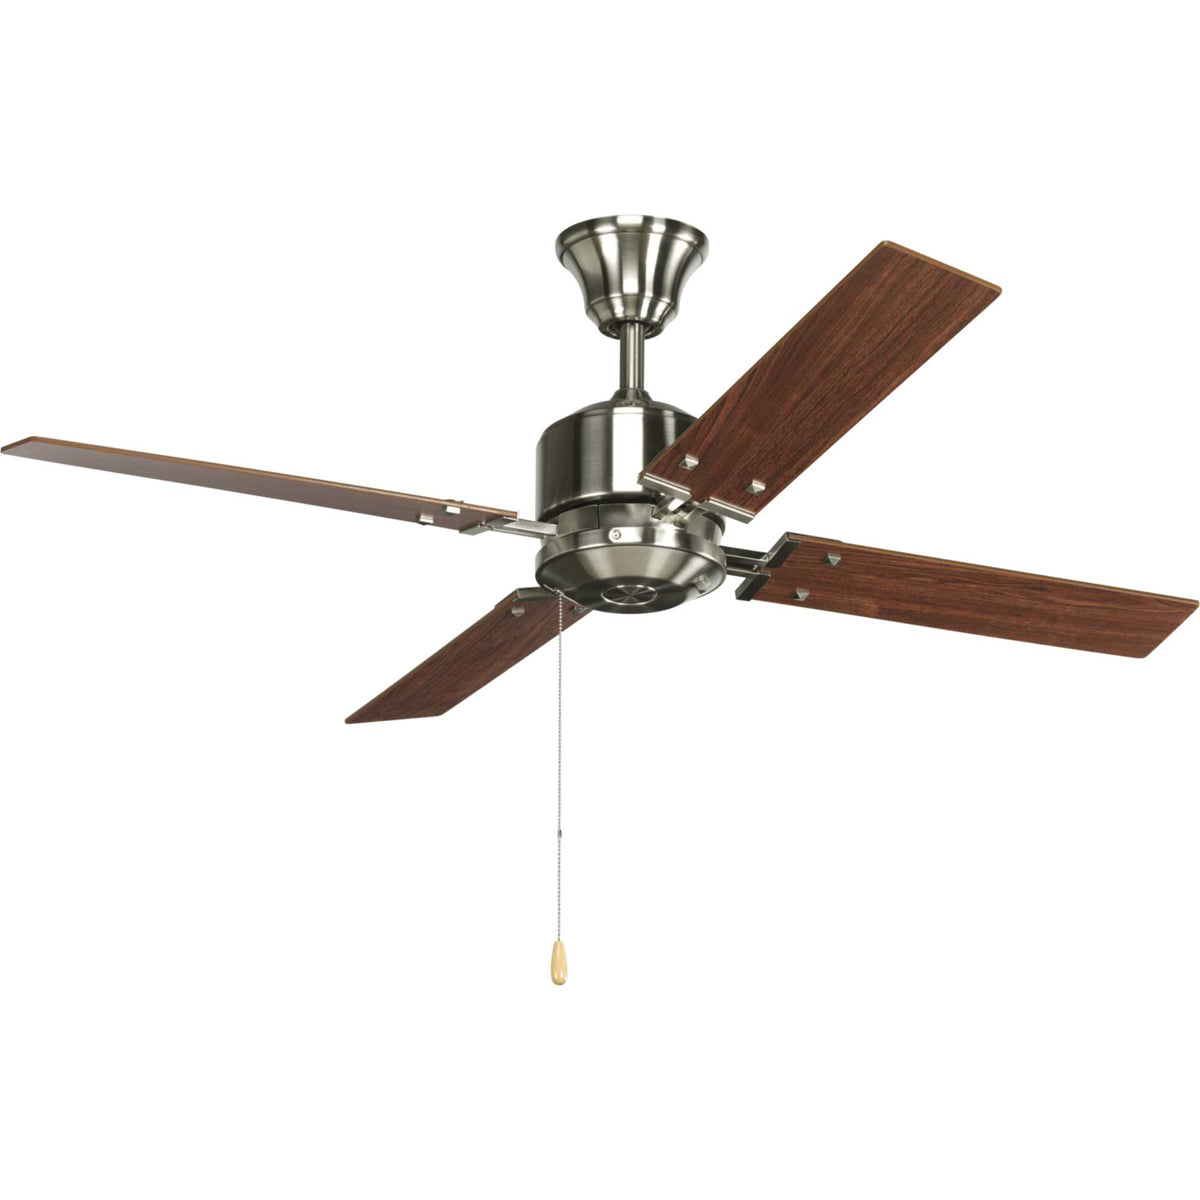 North Park 52" 4-Blade Ceiling Fan - Lamps Expo